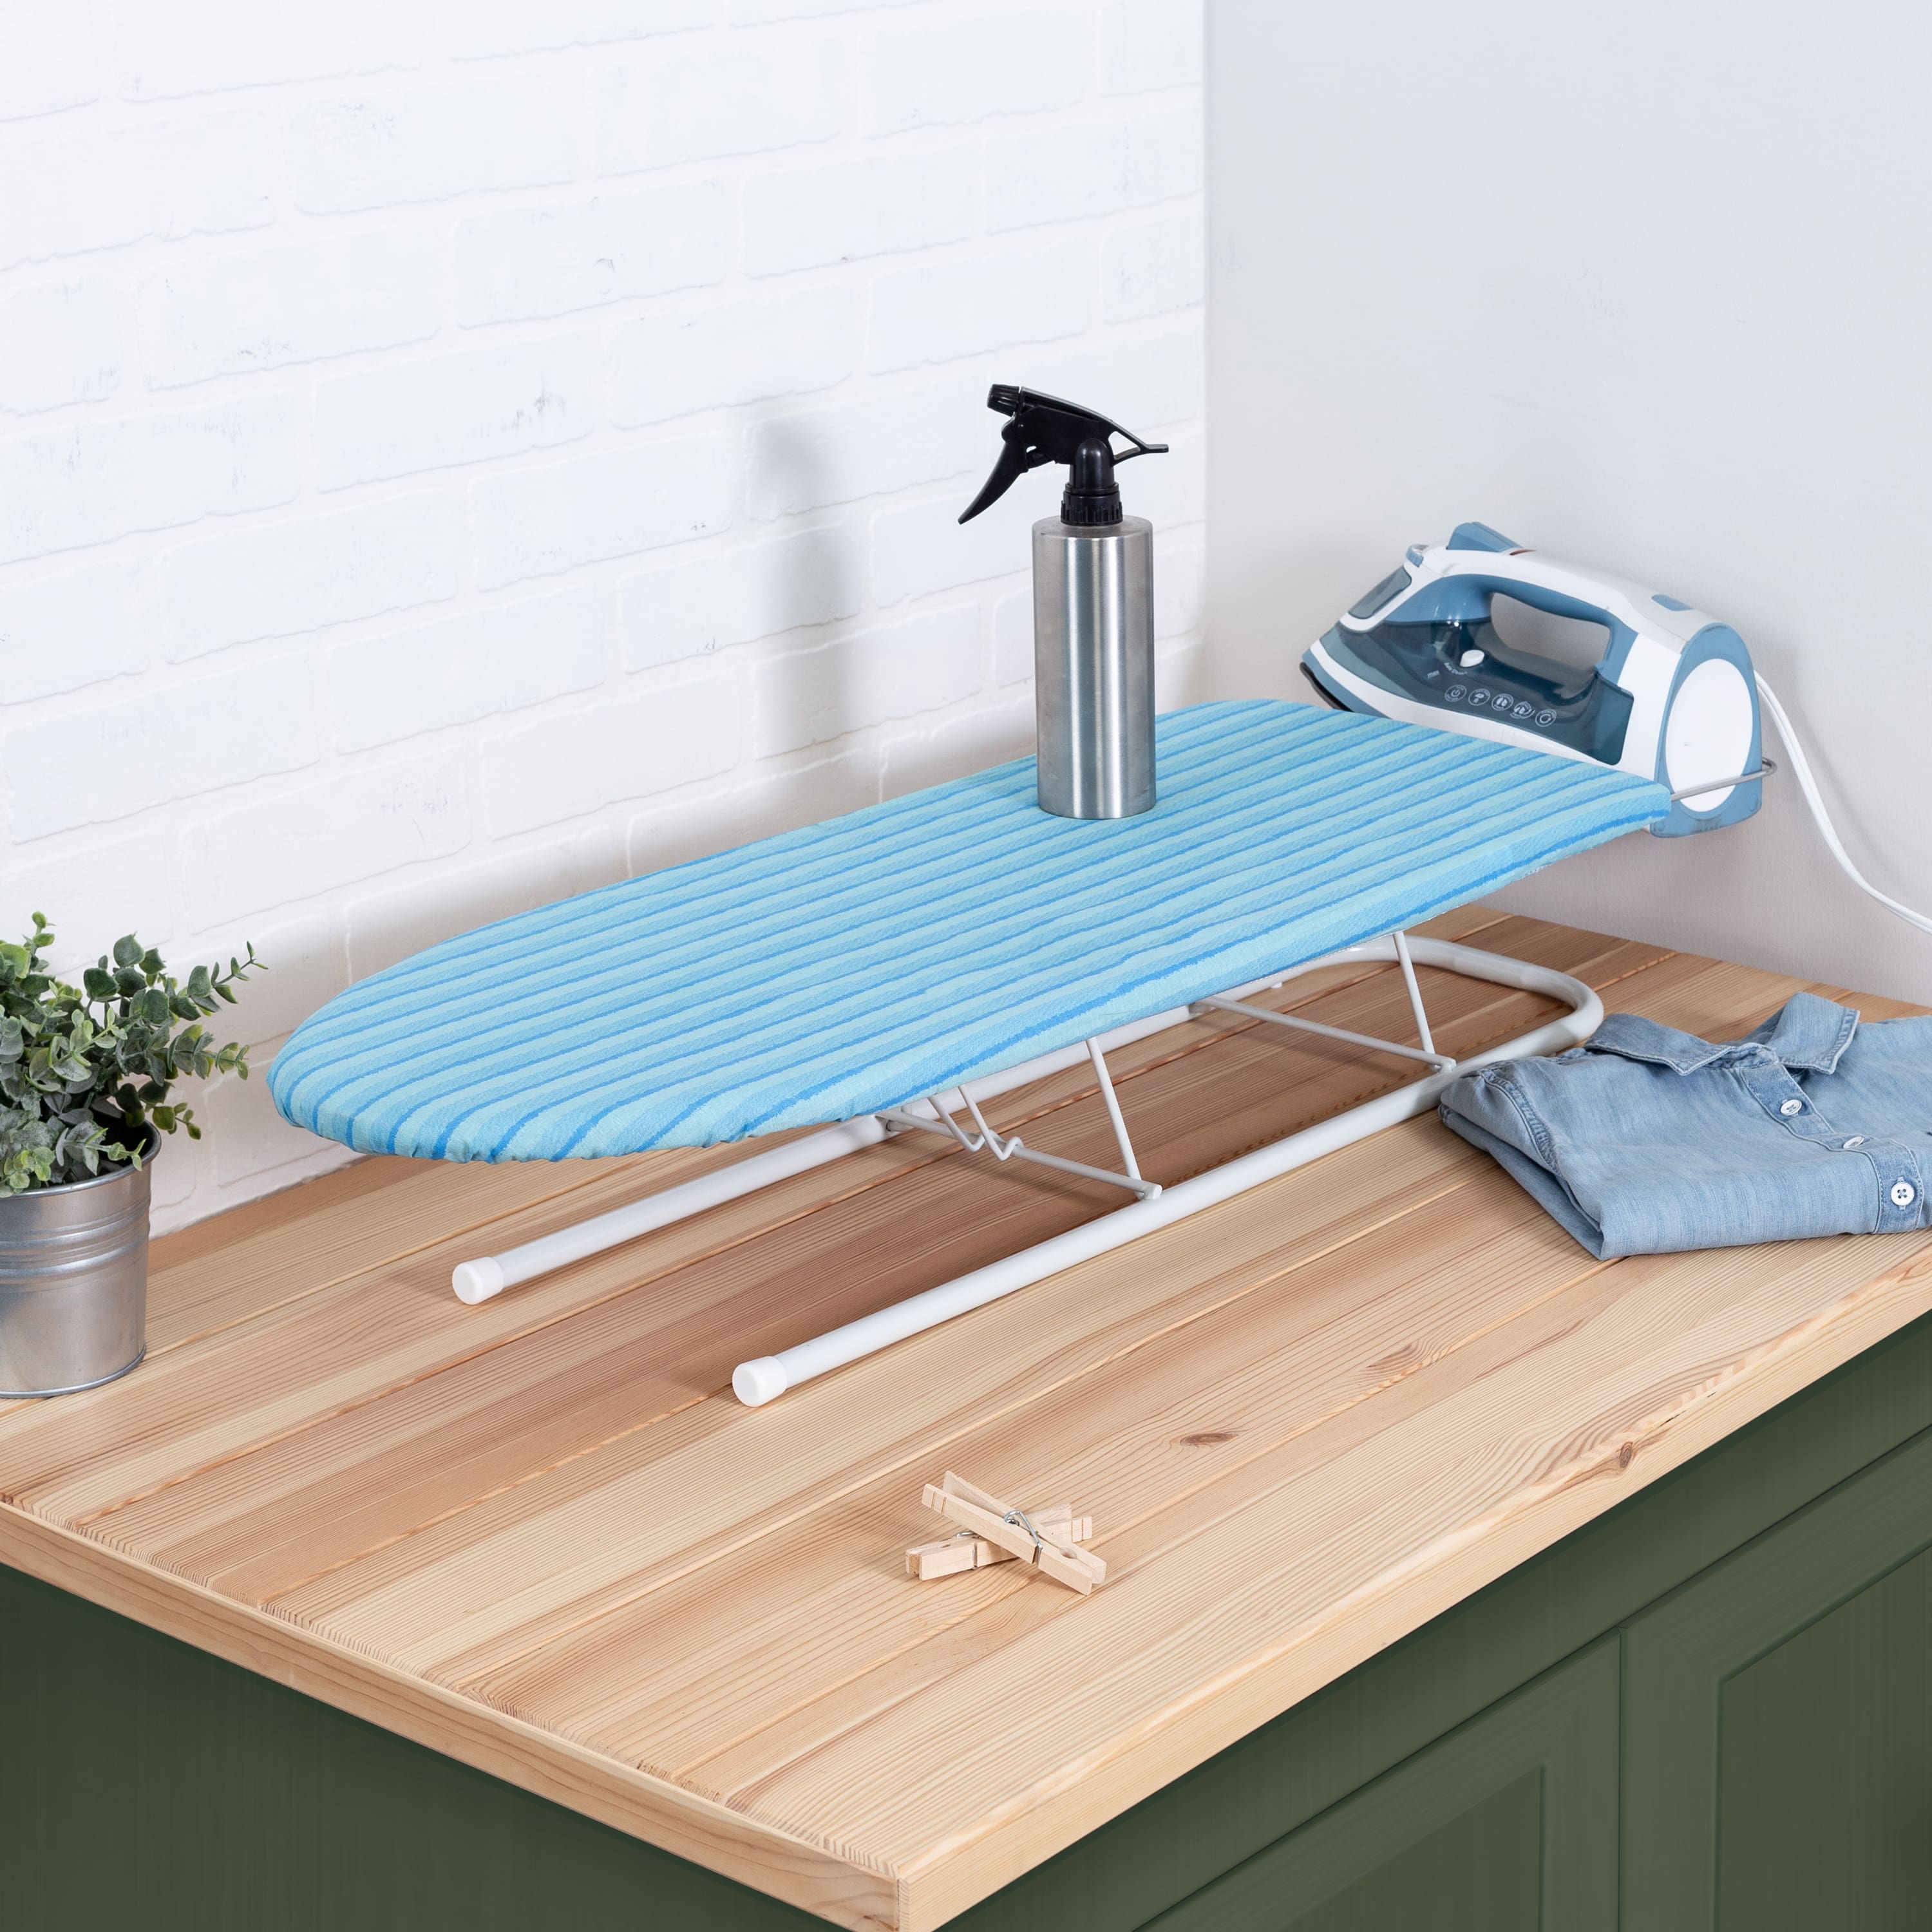 Honey Can Do Tabletop Ironing Board w/ Retractable Iron Rest